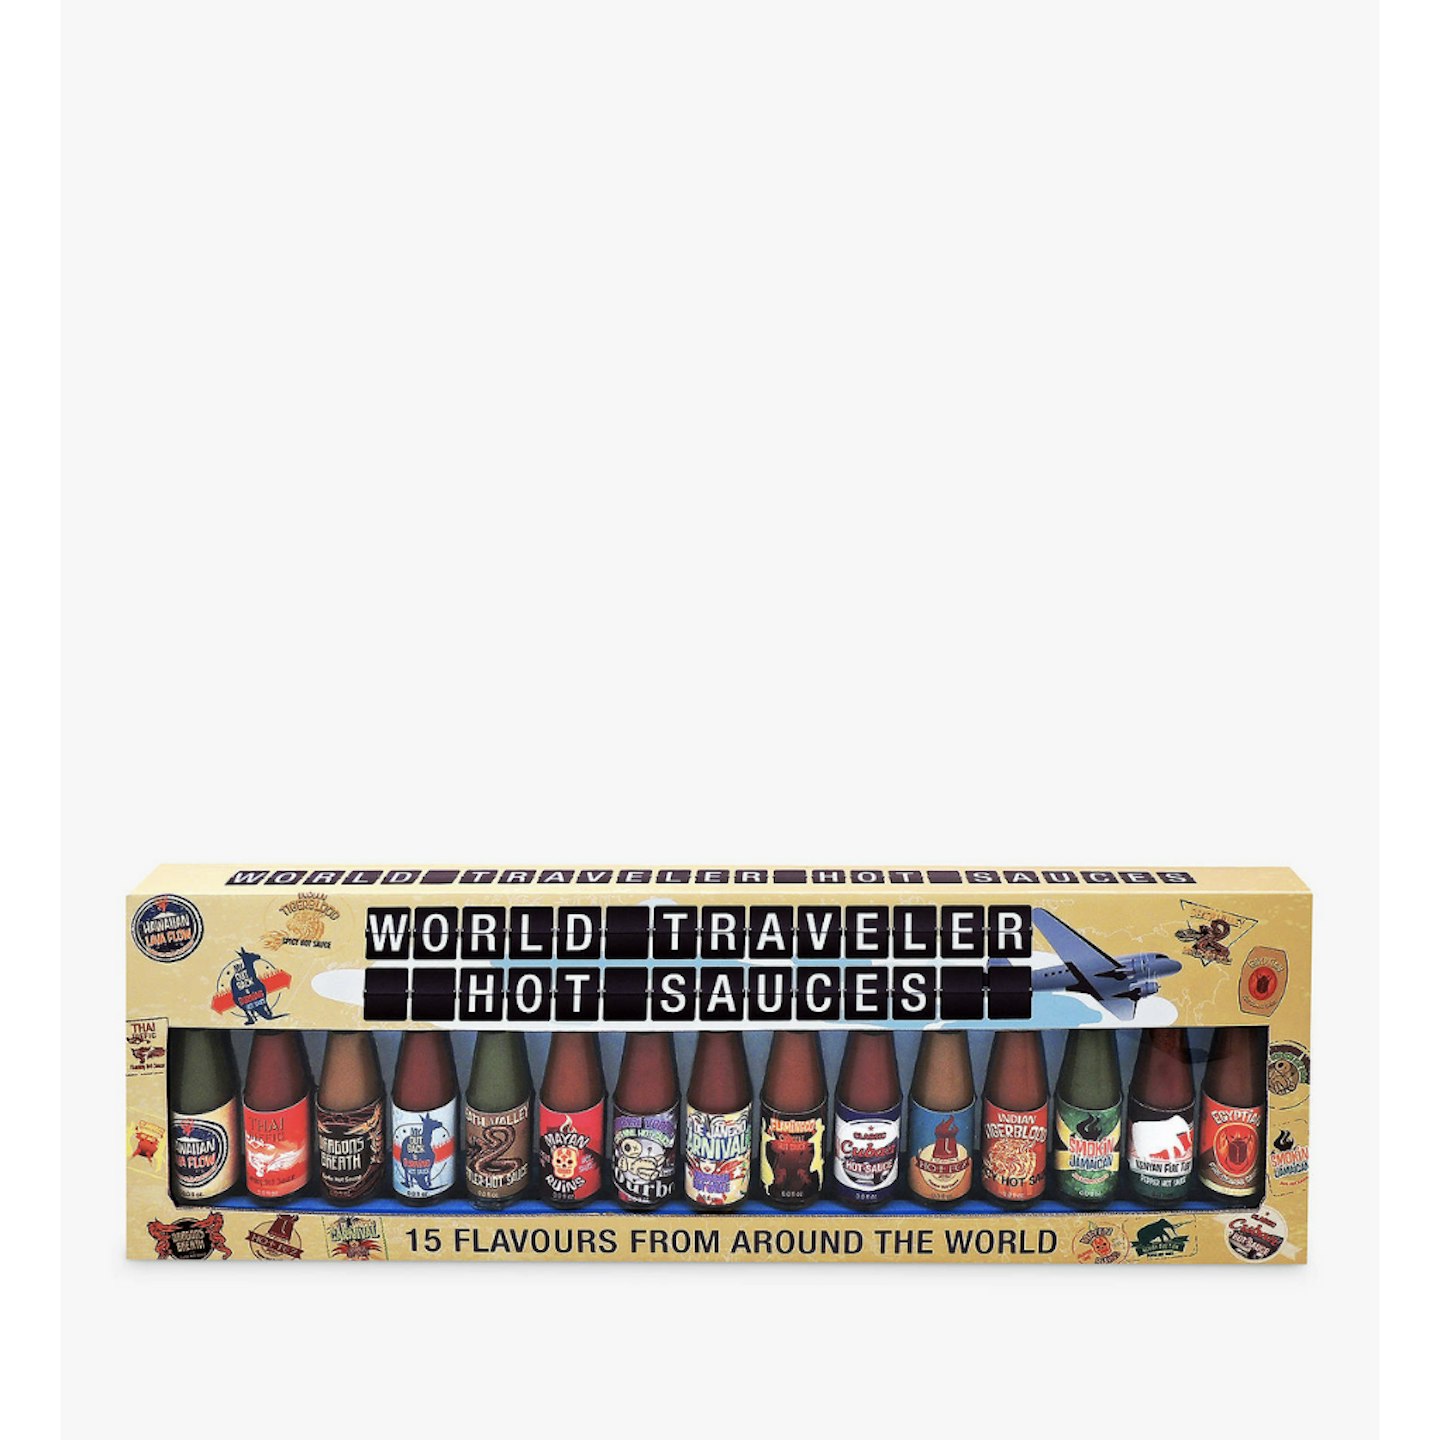 The Modern Cocktail World Traveller Hot Sauces, Pack of 15